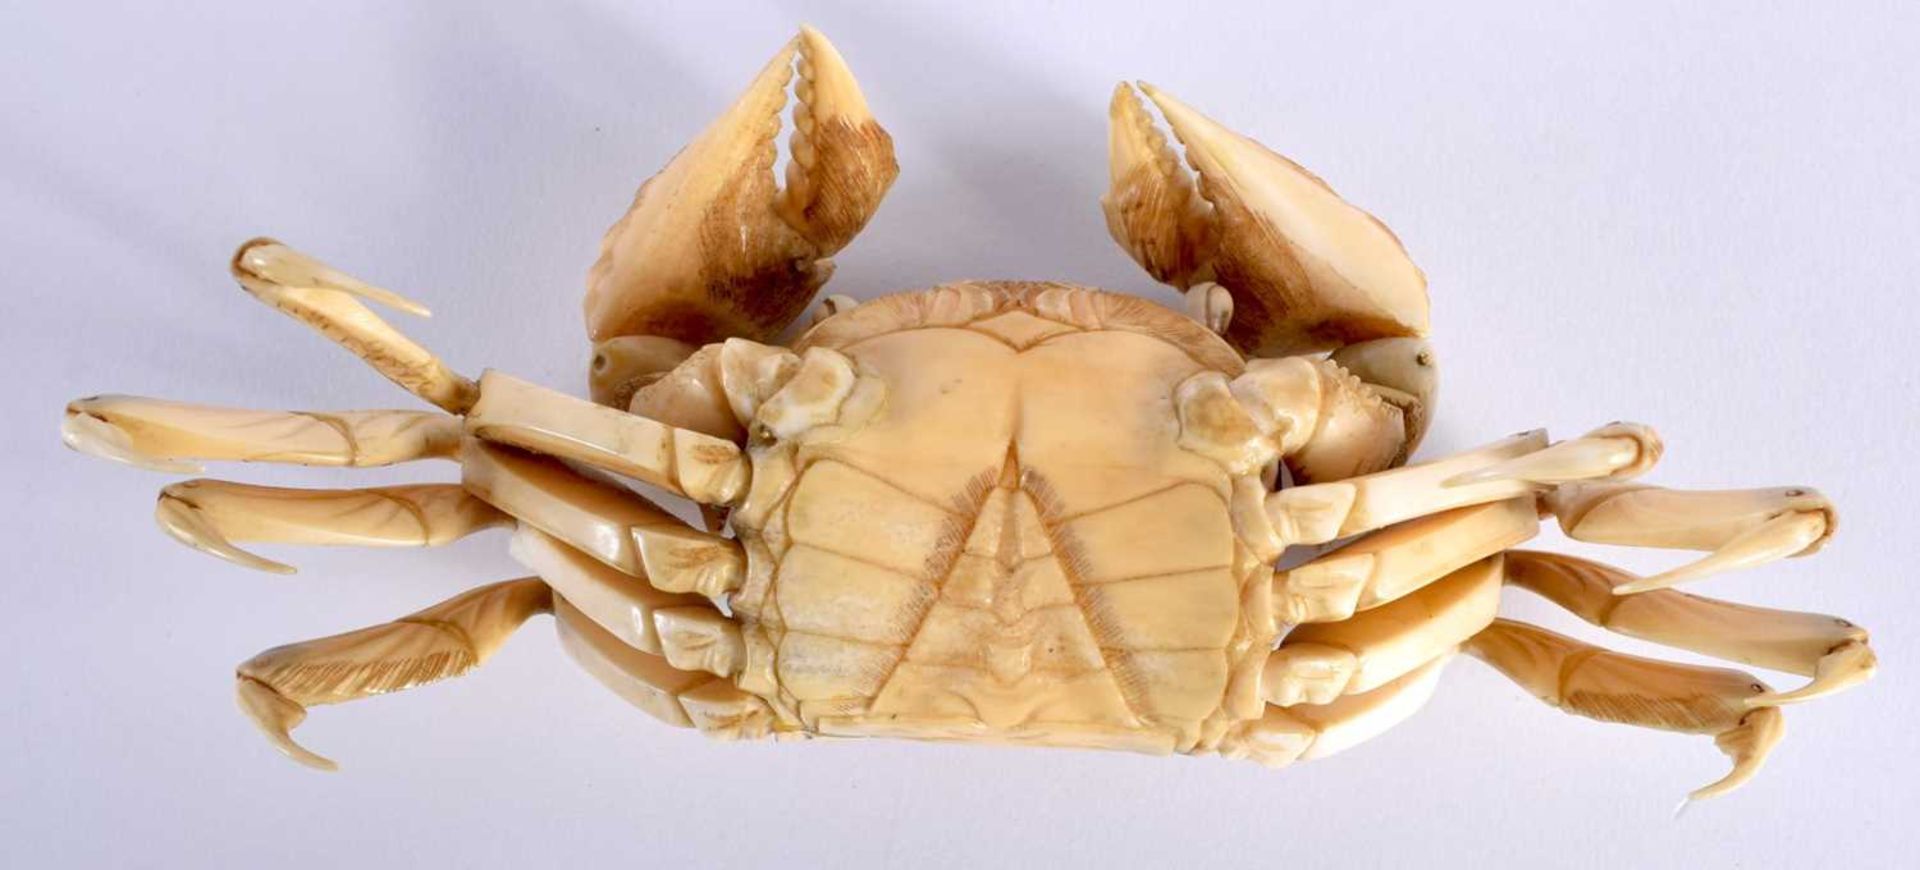 A FINE 19TH CENTURY JAPANESE MEIJI PERIOD FULLY ARTICULATED BONE JIZAI OKIMONO CRAB with fully - Image 6 of 6